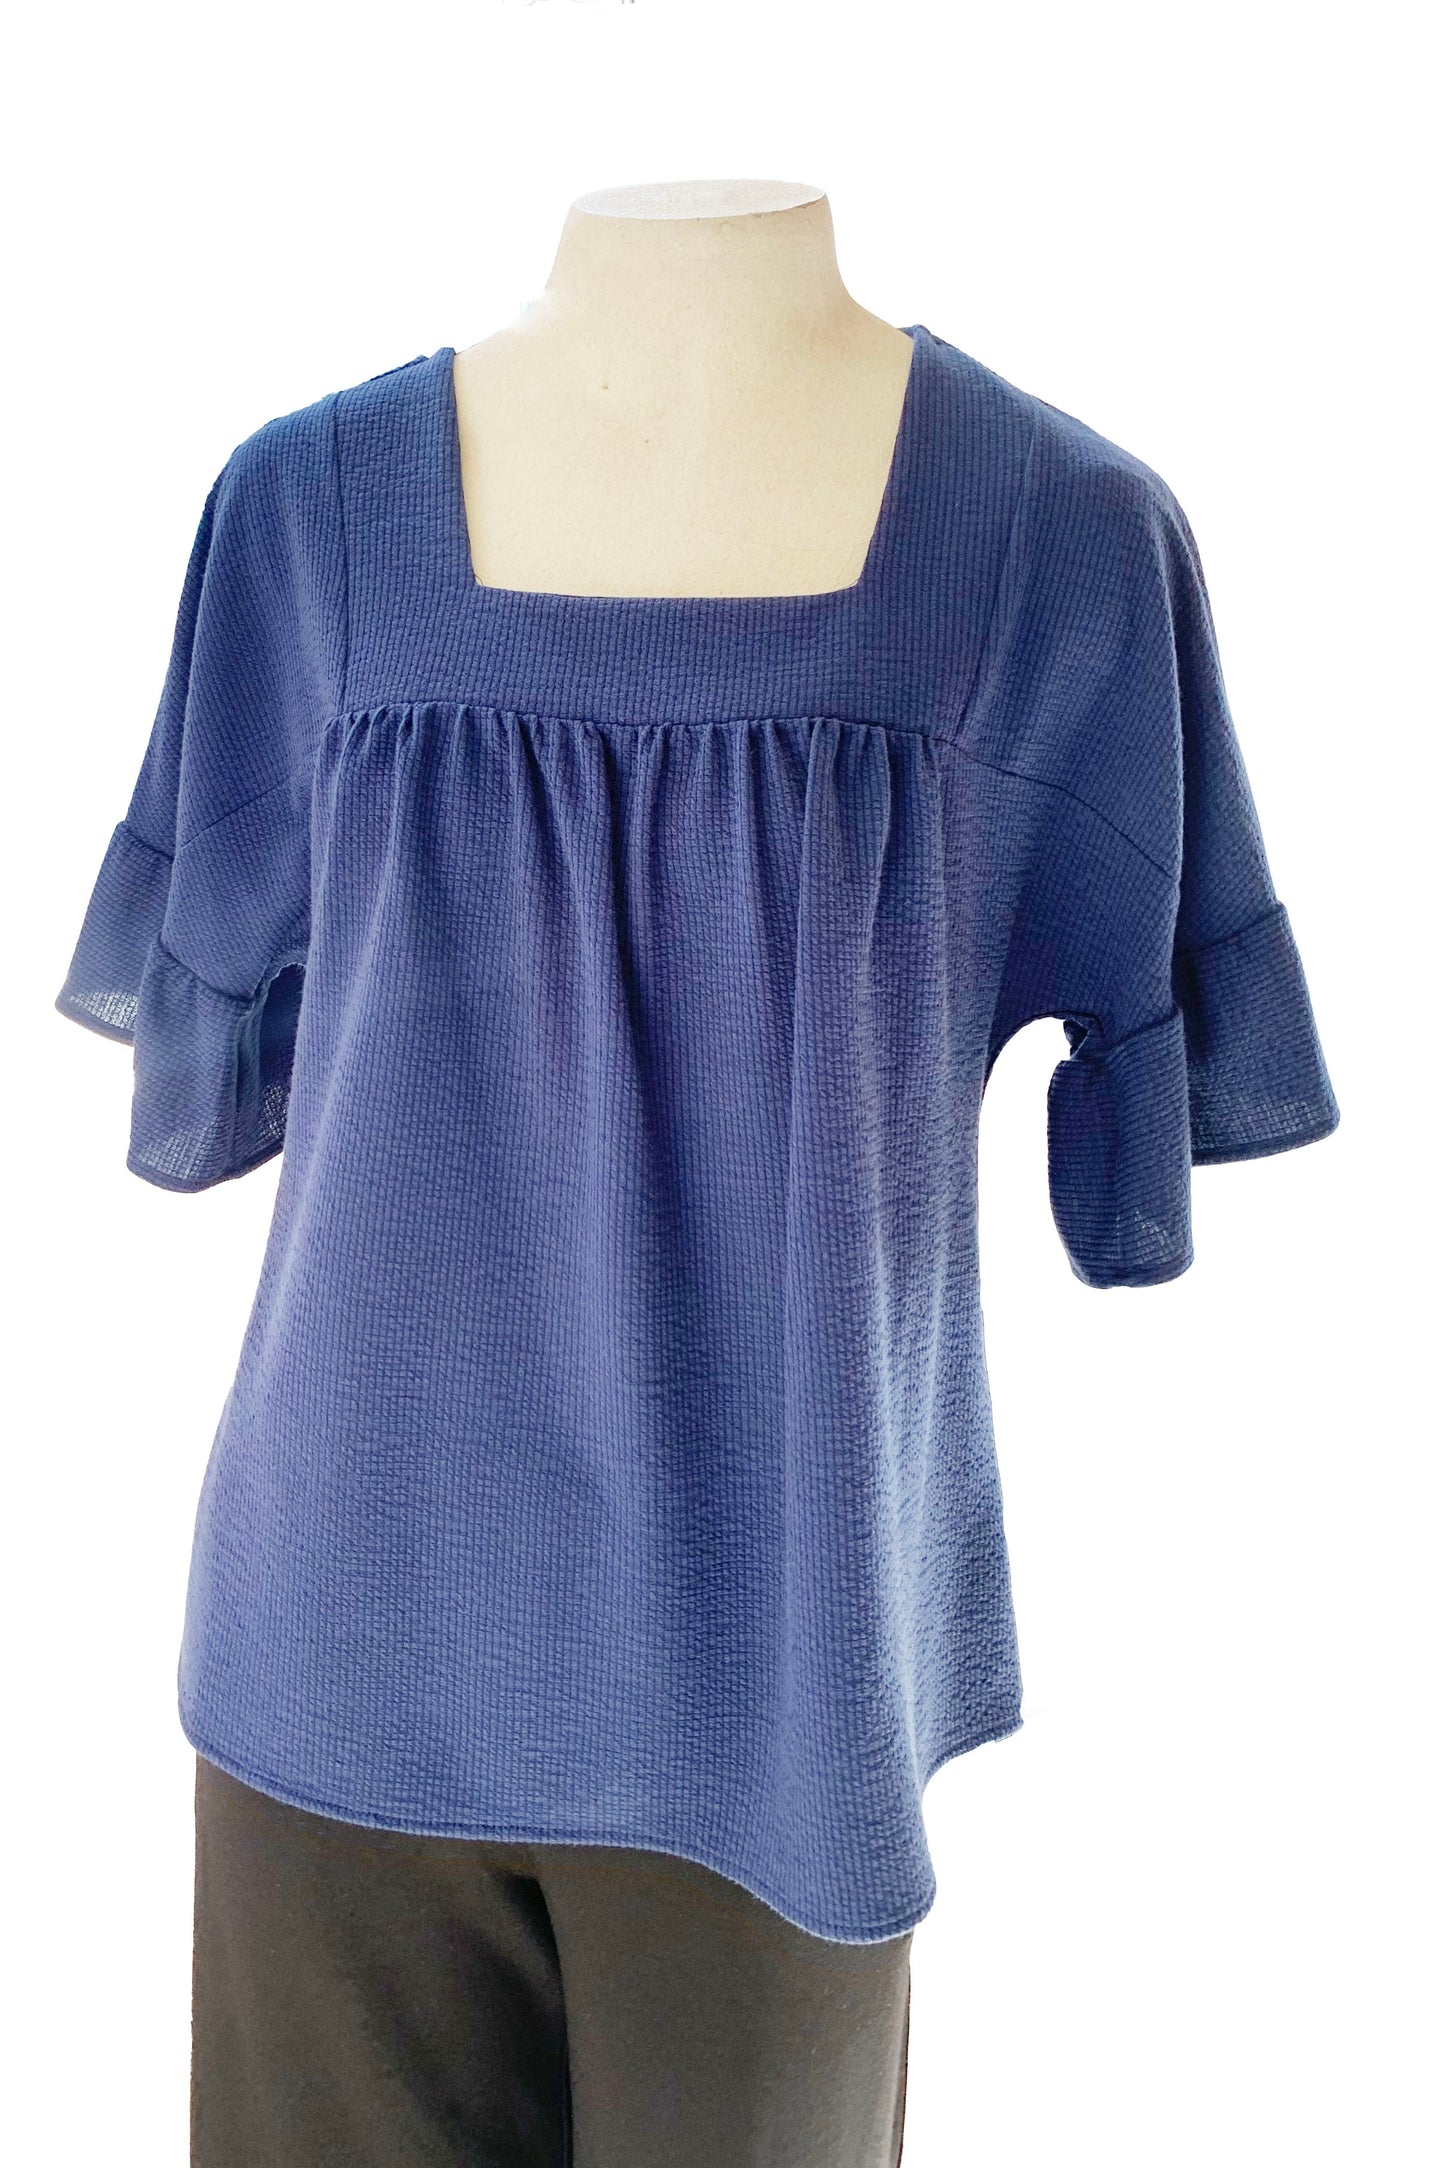 Calvin Top by Pure Essence, Navy, square neckline, gathers across the chest, loose elbow-length sleeves with ruffle detail, flows away from the body, rib-knit, sizes XS to XXL, made in Canada